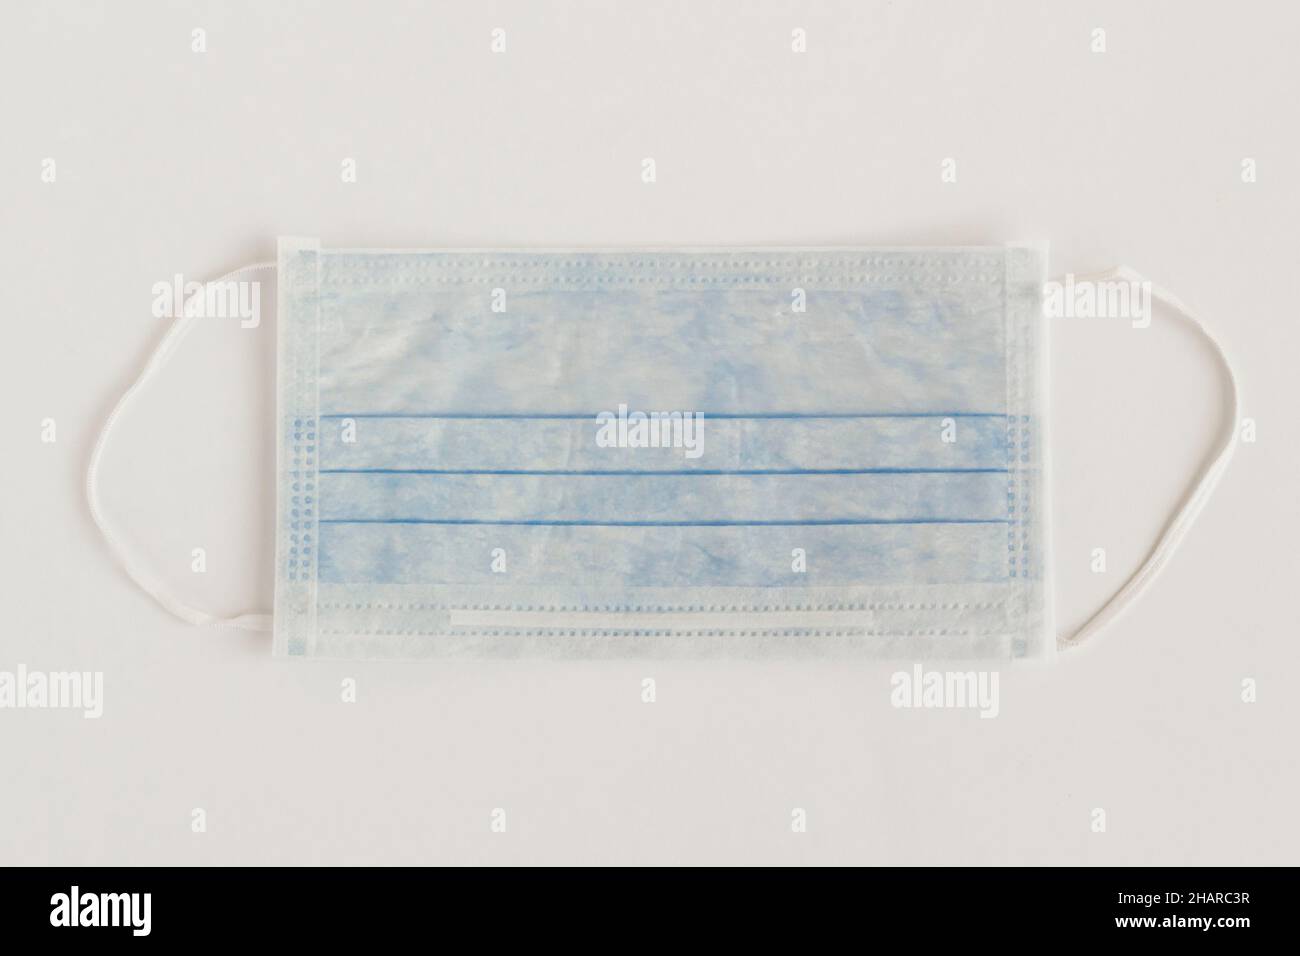 Three ply structure,single use hygenic face mask on white background with copy space. Stock Photo